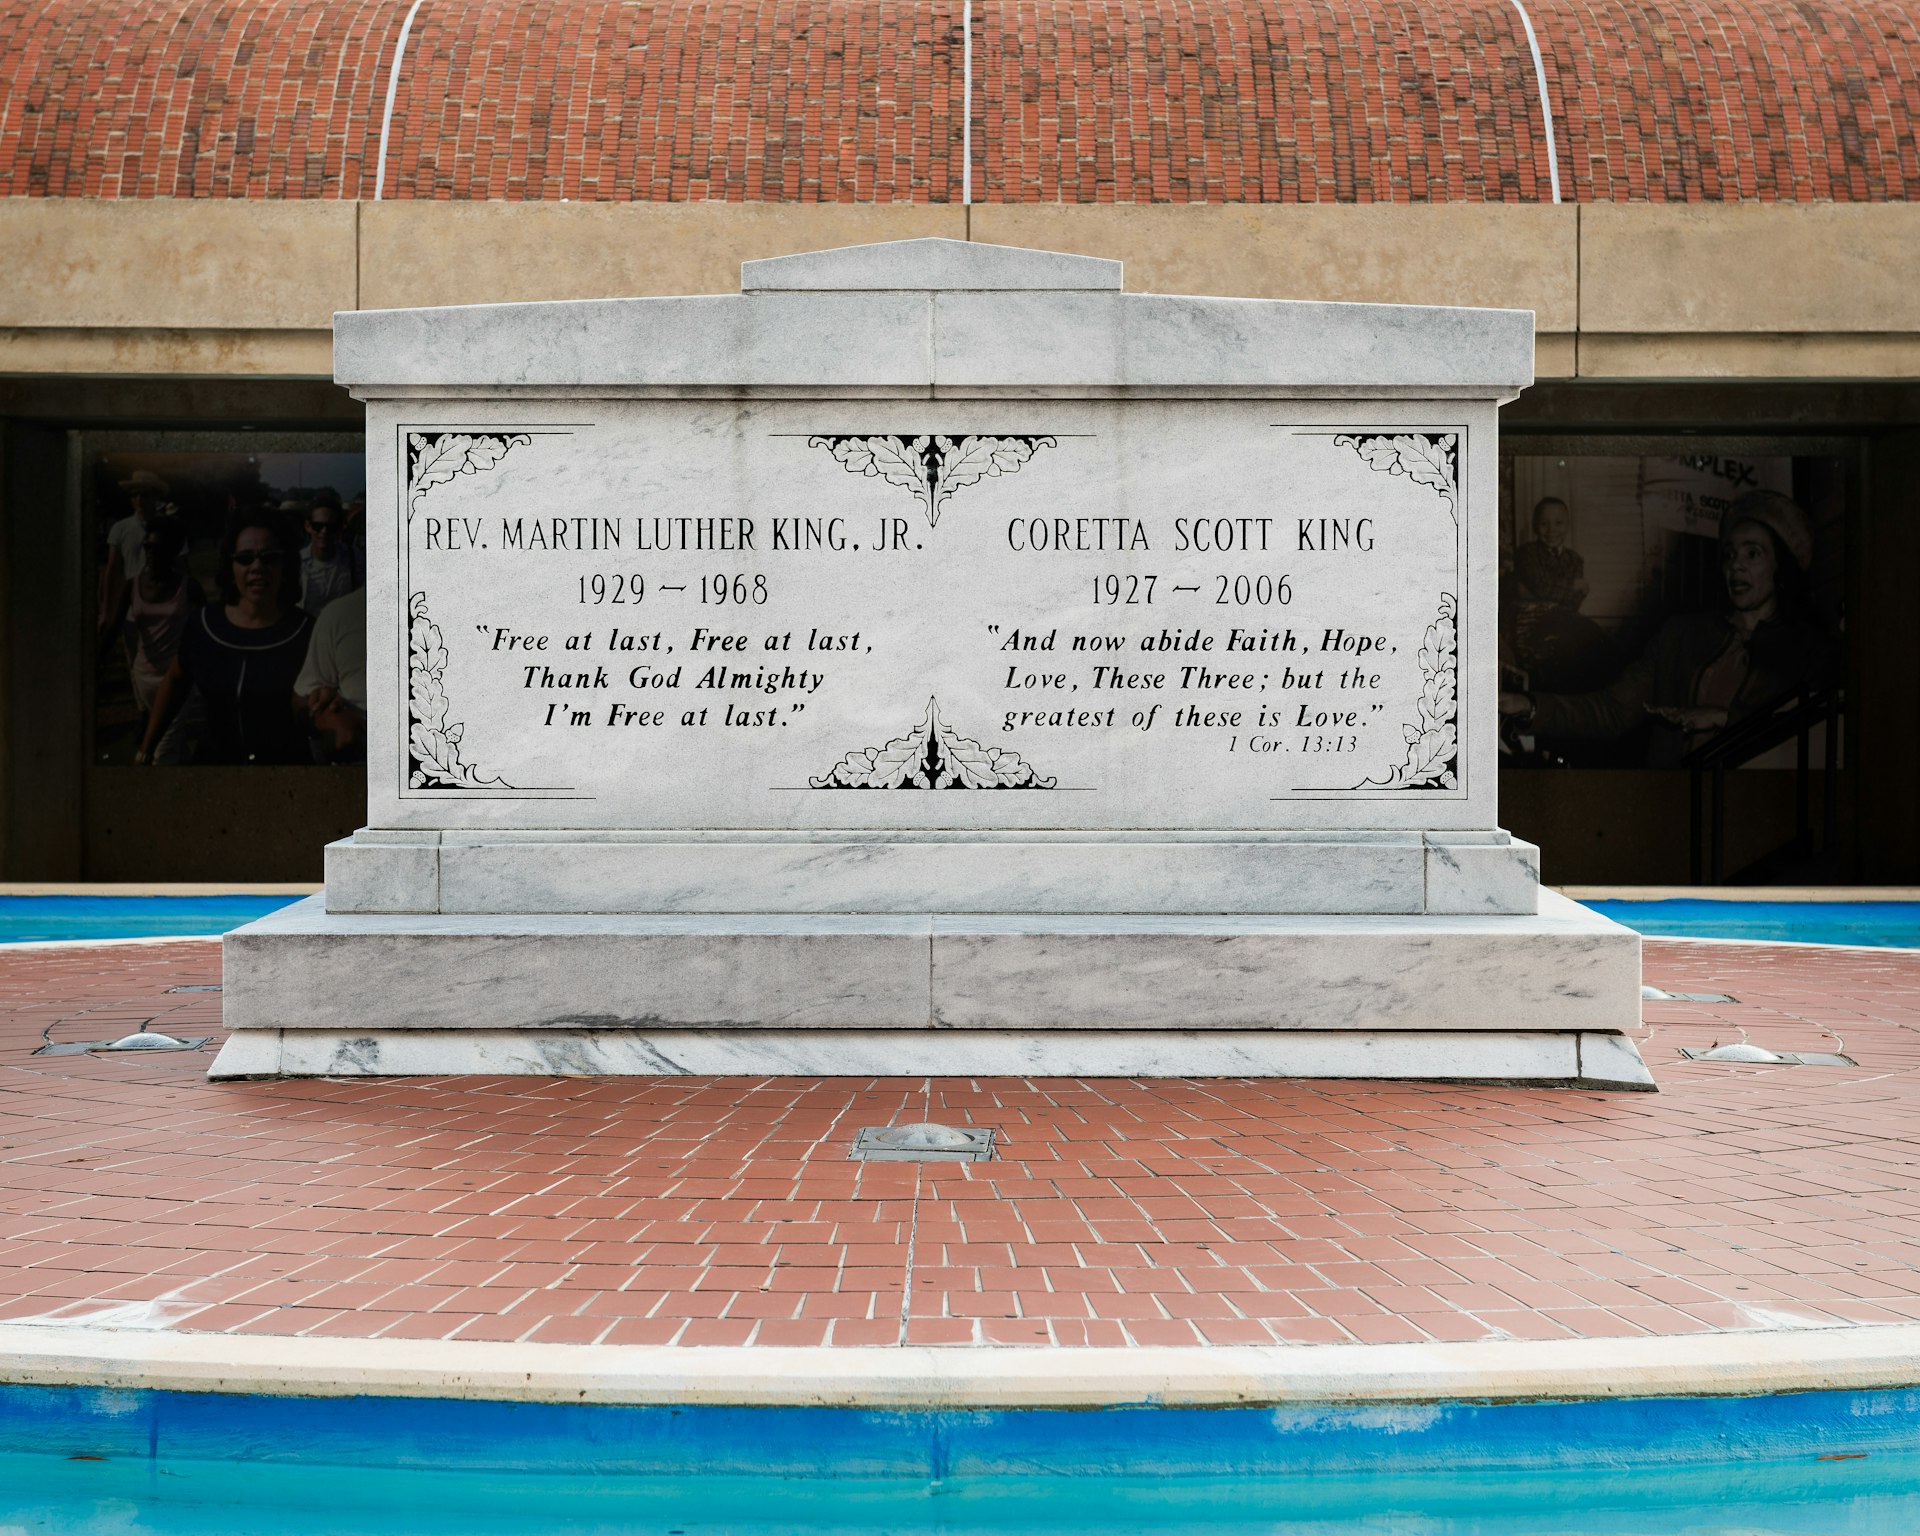 Martin Luther King, Jr. and Coretta Scott King Tomb at the Martin Luther King, Jr. National Historic Site. 